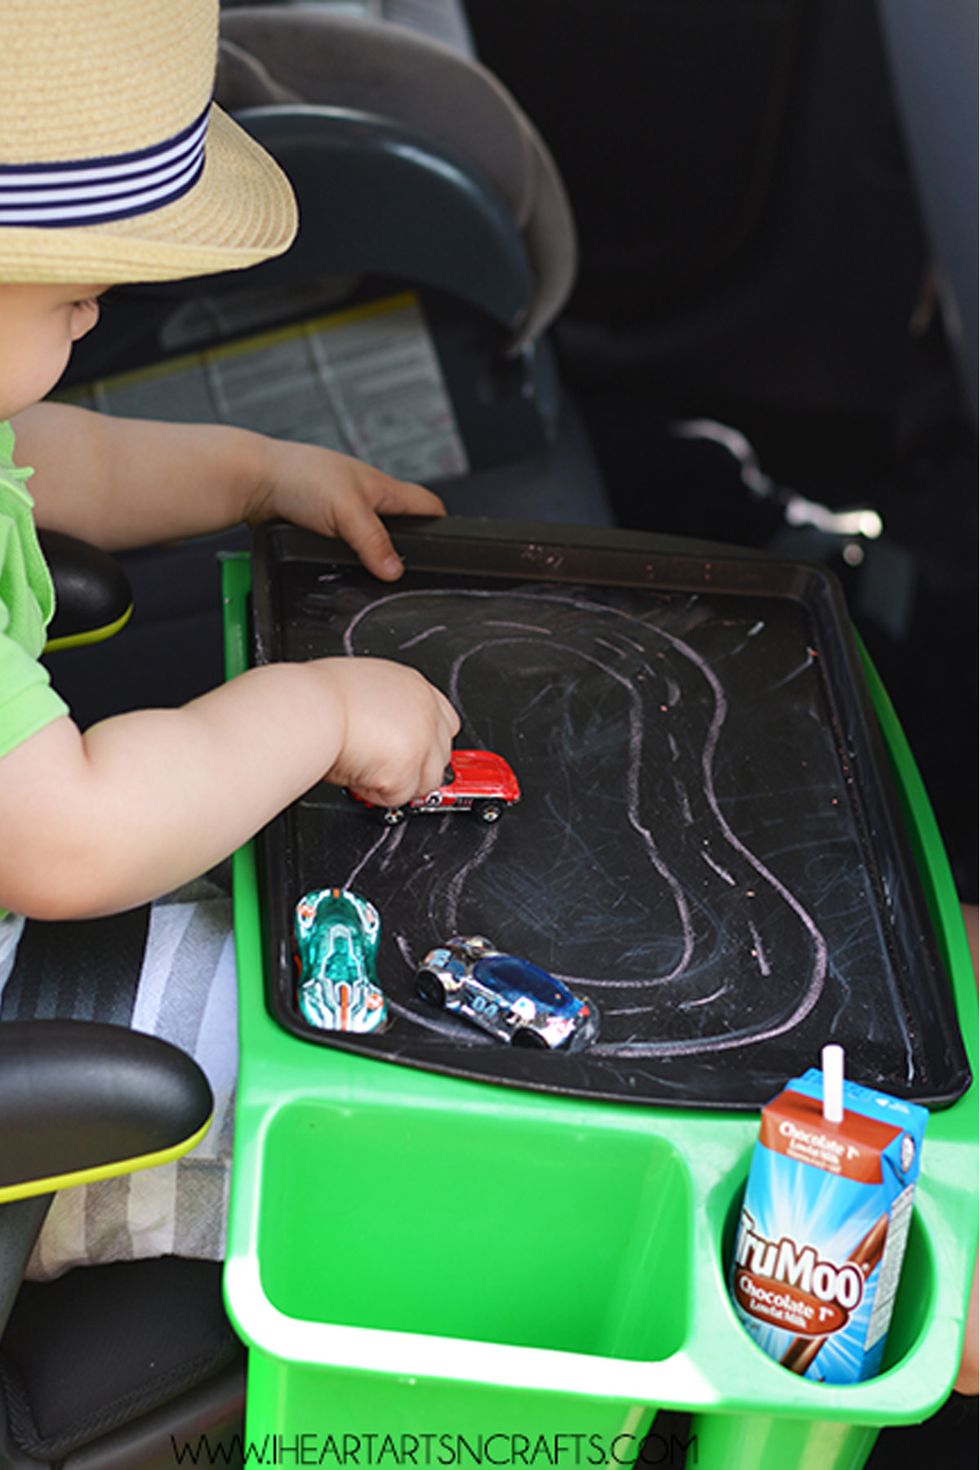 21 Best Road Trip Games to Play on Family Vacation - Car Games for Kids